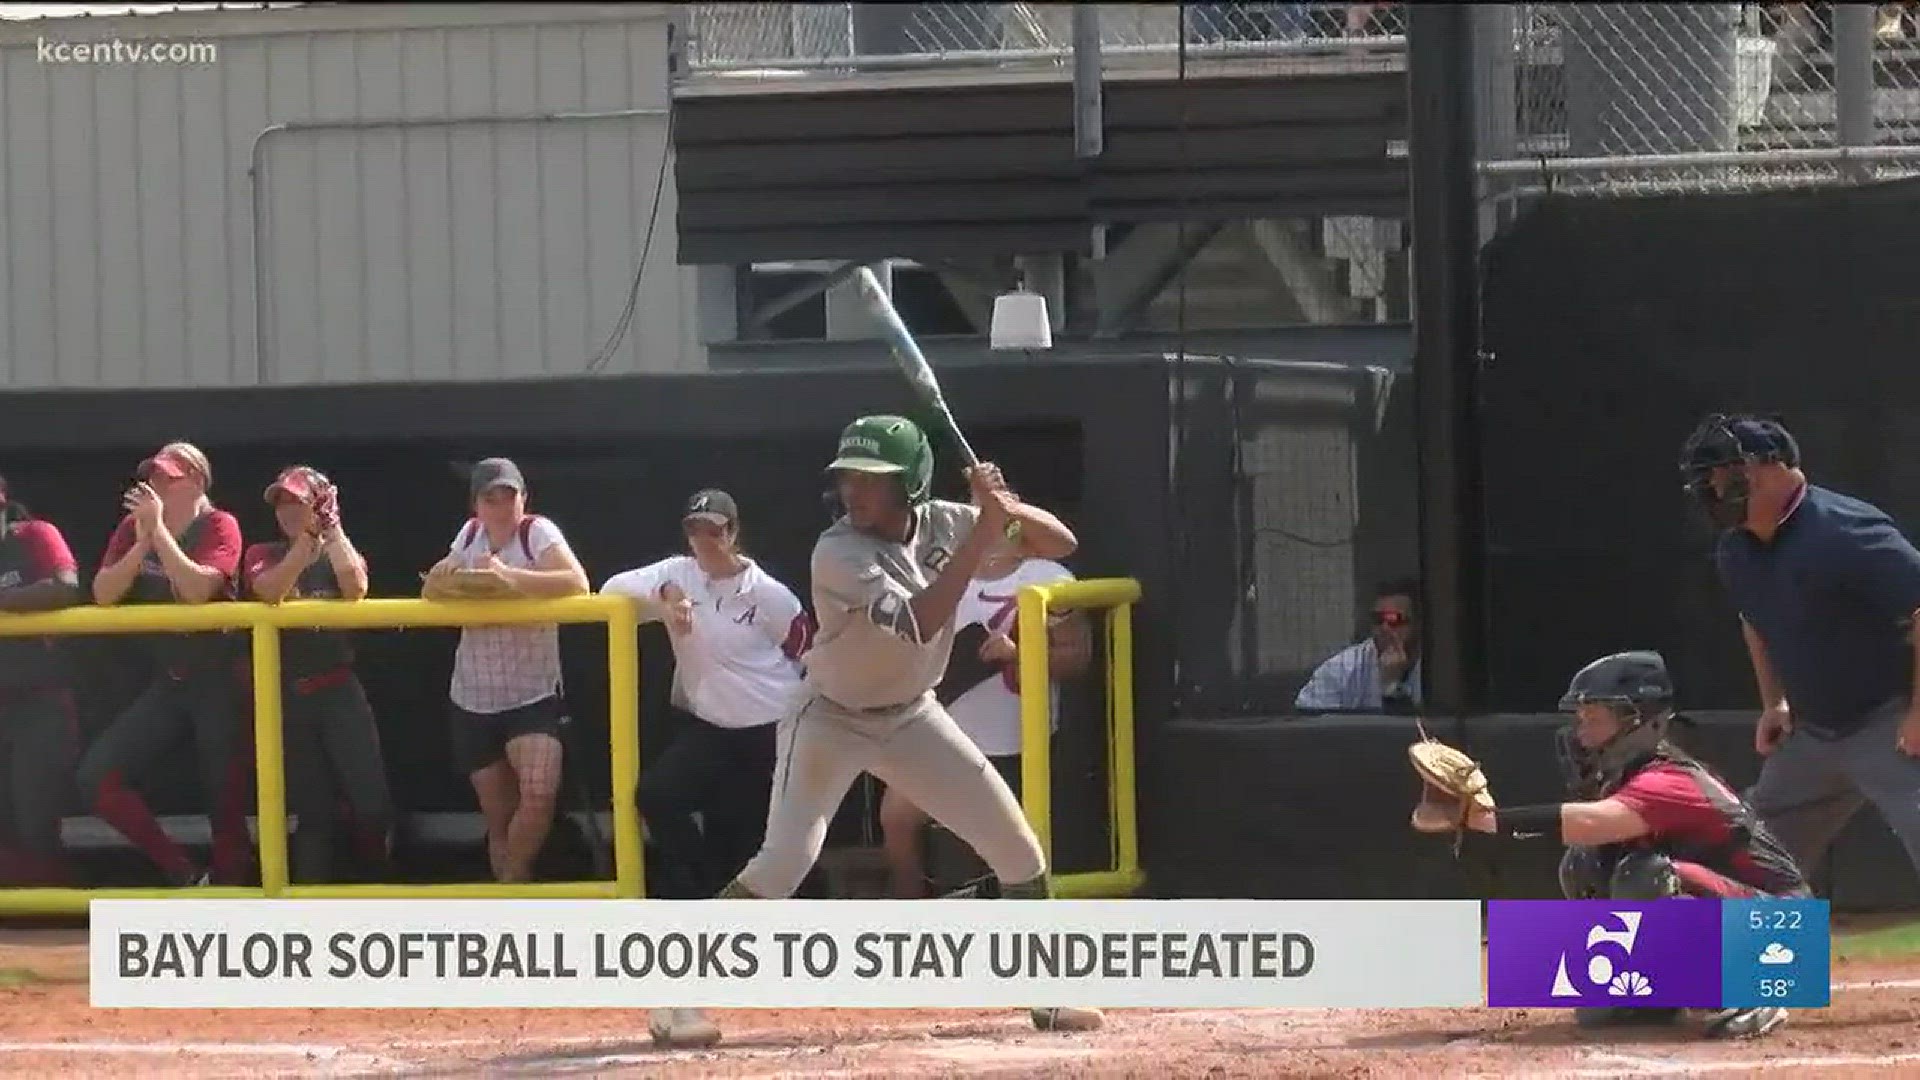 Baylor softball defeats Alabama 2-1 to wrap up the Black and Gold Invitational undefeatedVideo courtesy: WDAM